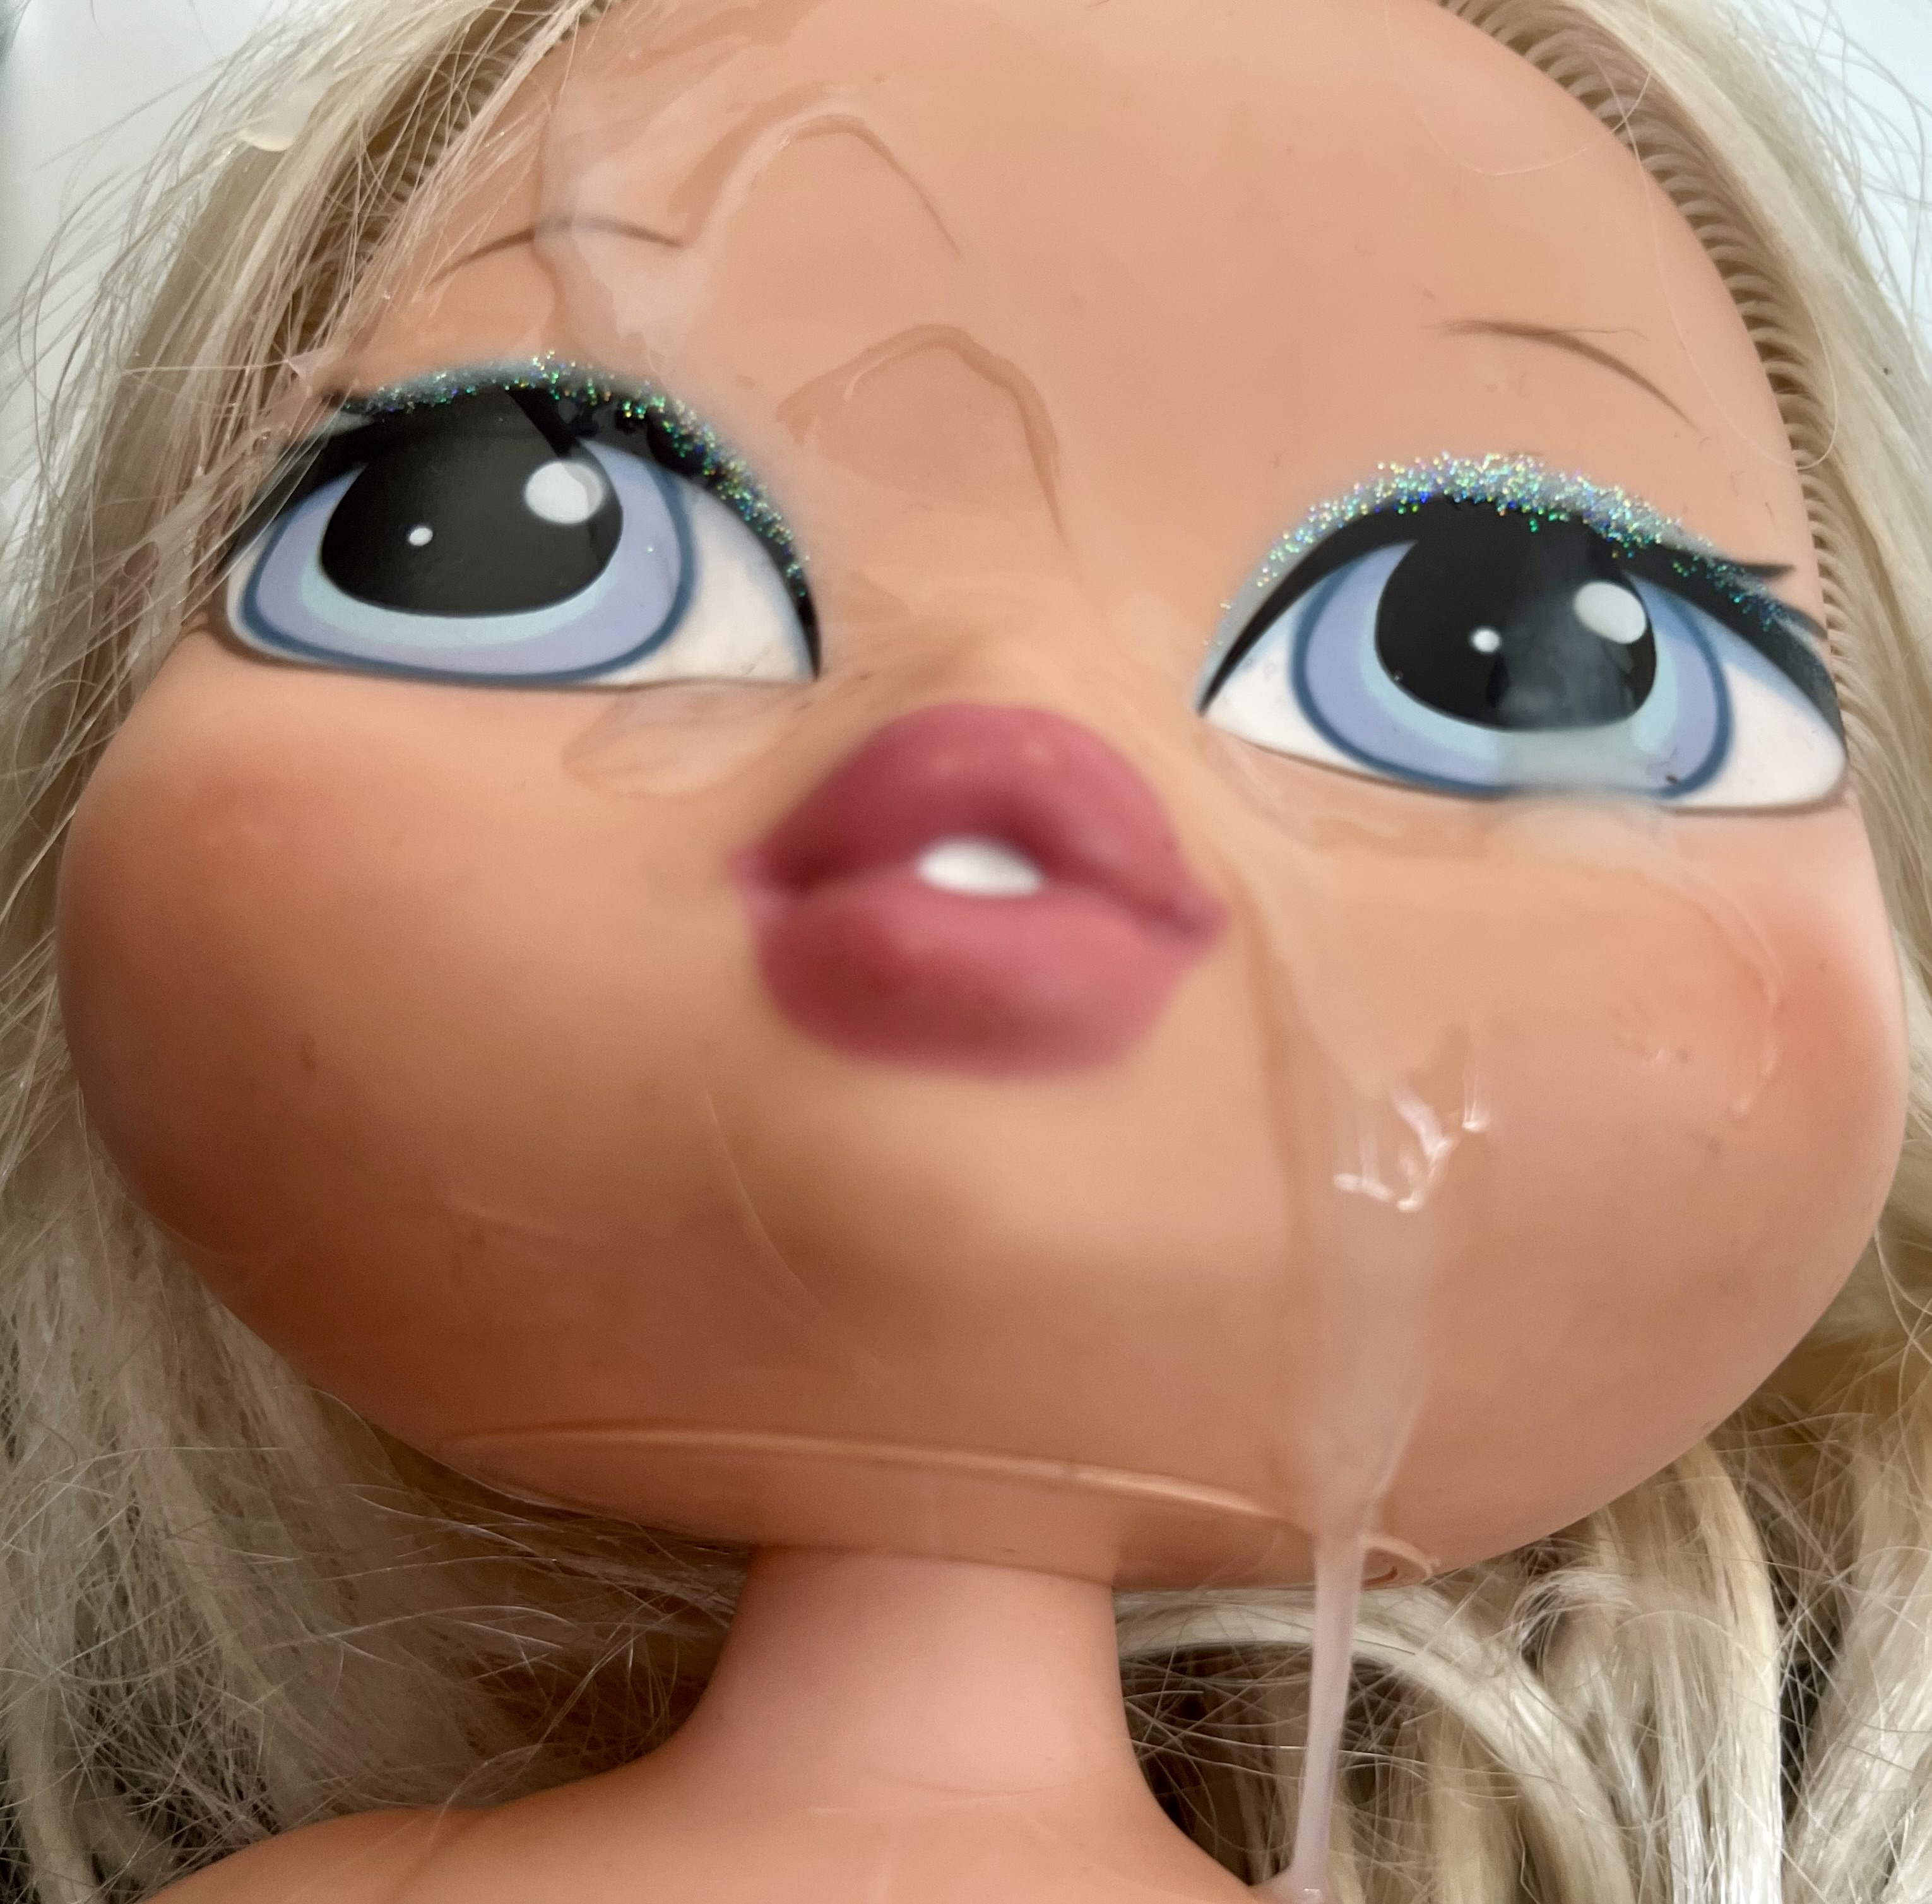 Smelly blonde second handstore doll fist asshole and facial